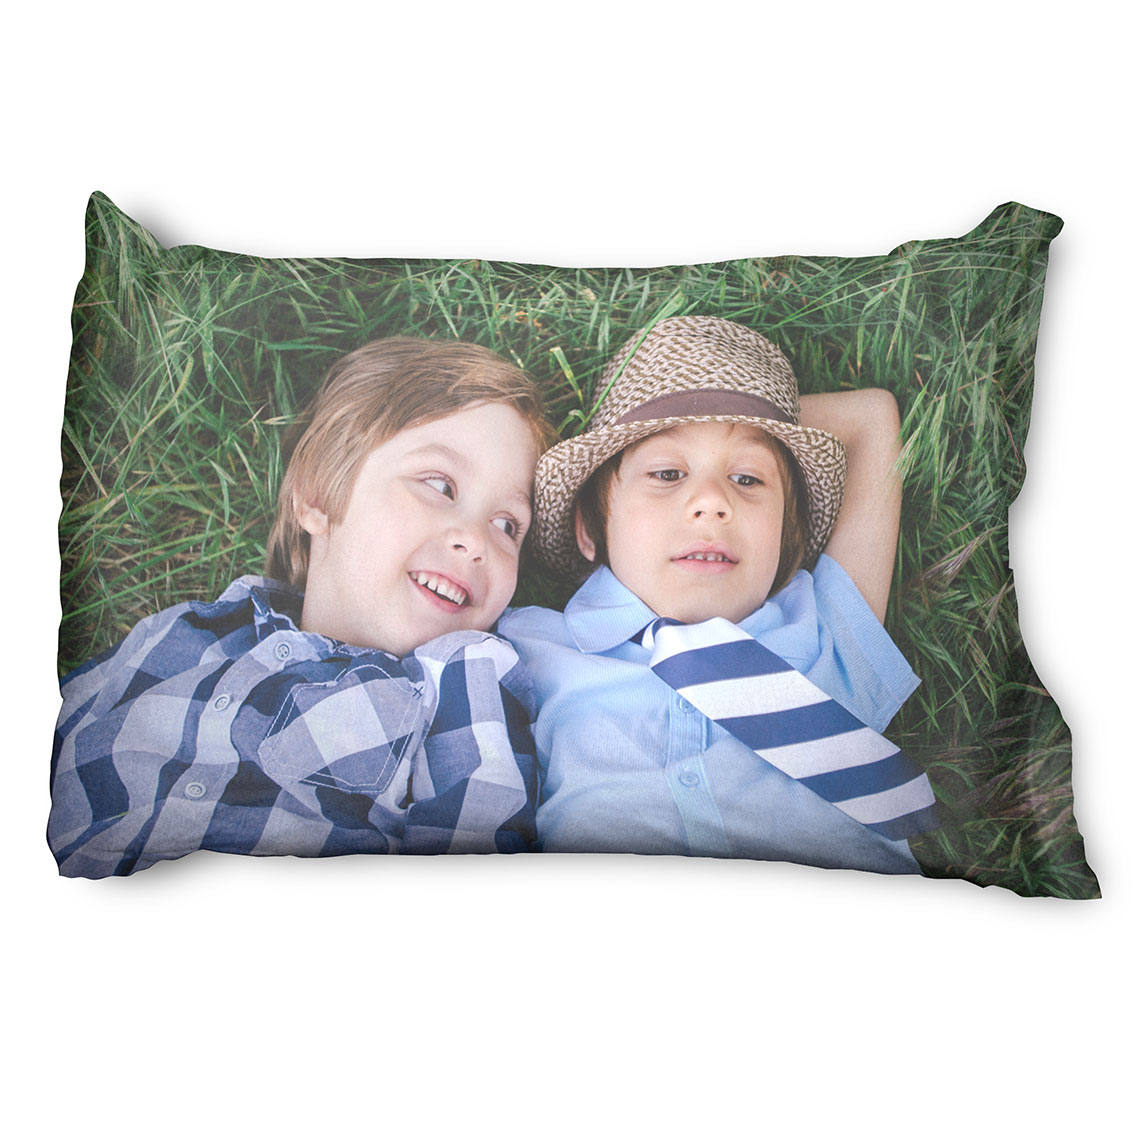 Custom Personalized Photo Pillowcase Cushion Cover Pillow Case Anniversary Gift 